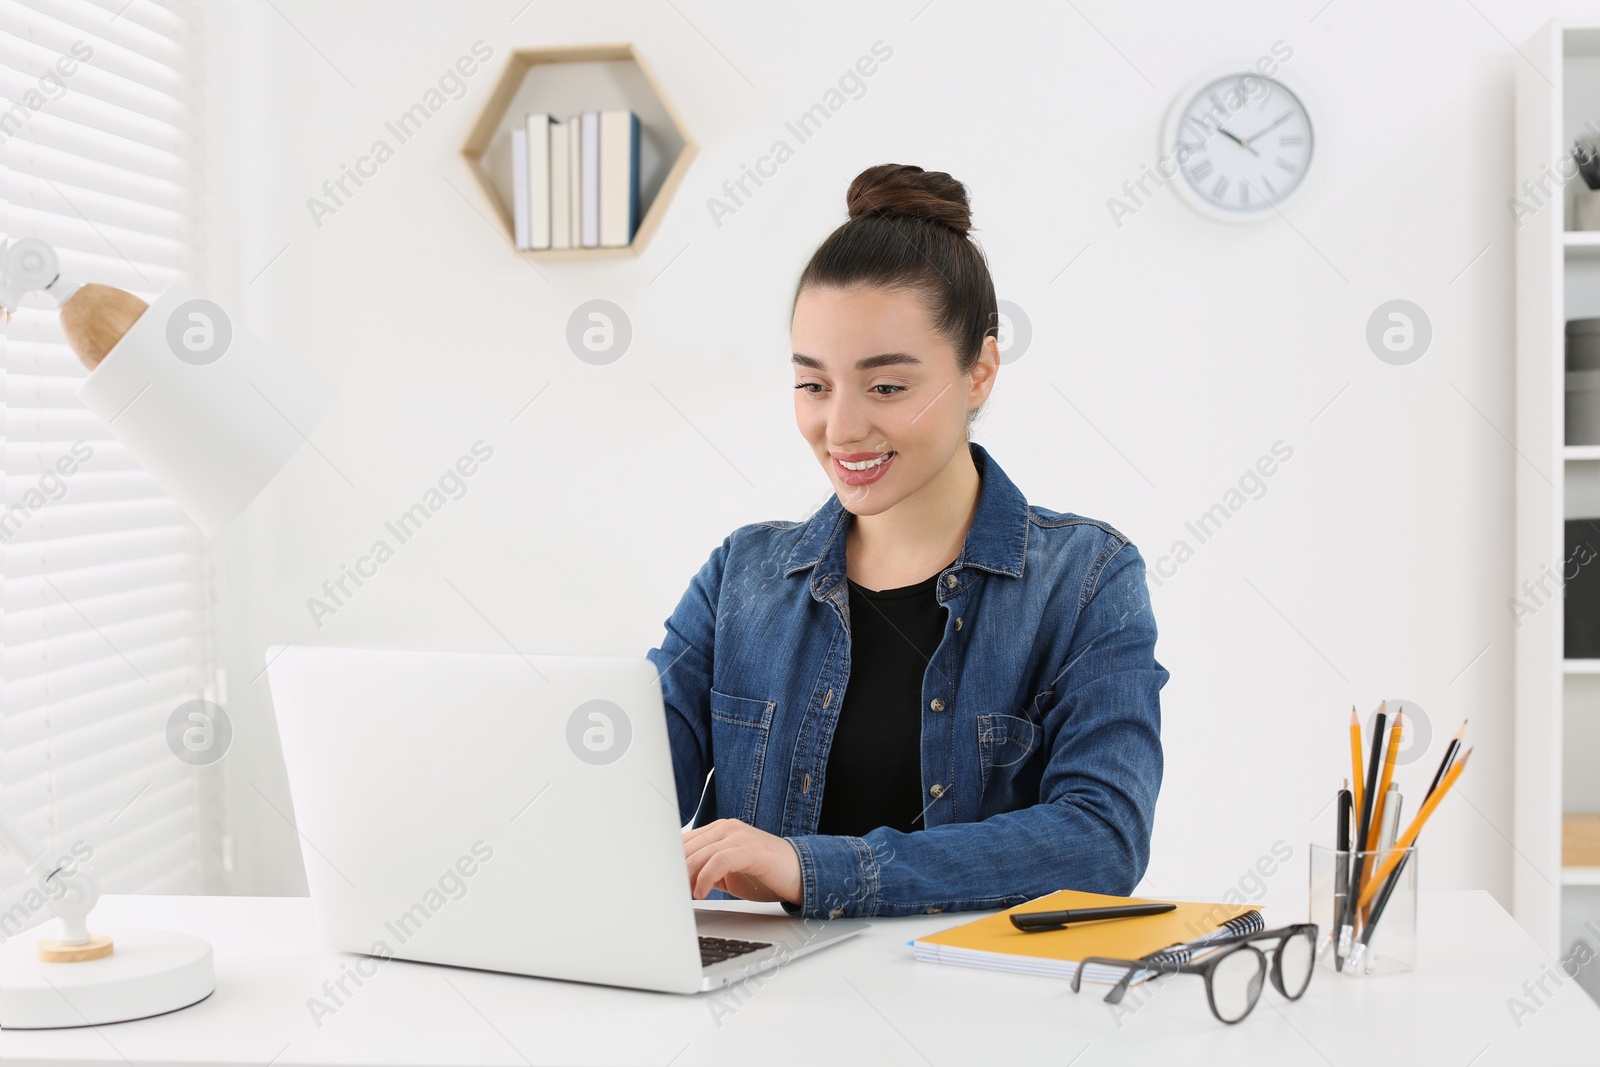 Photo of Home workplace. Happy woman typing on laptop at white desk in room